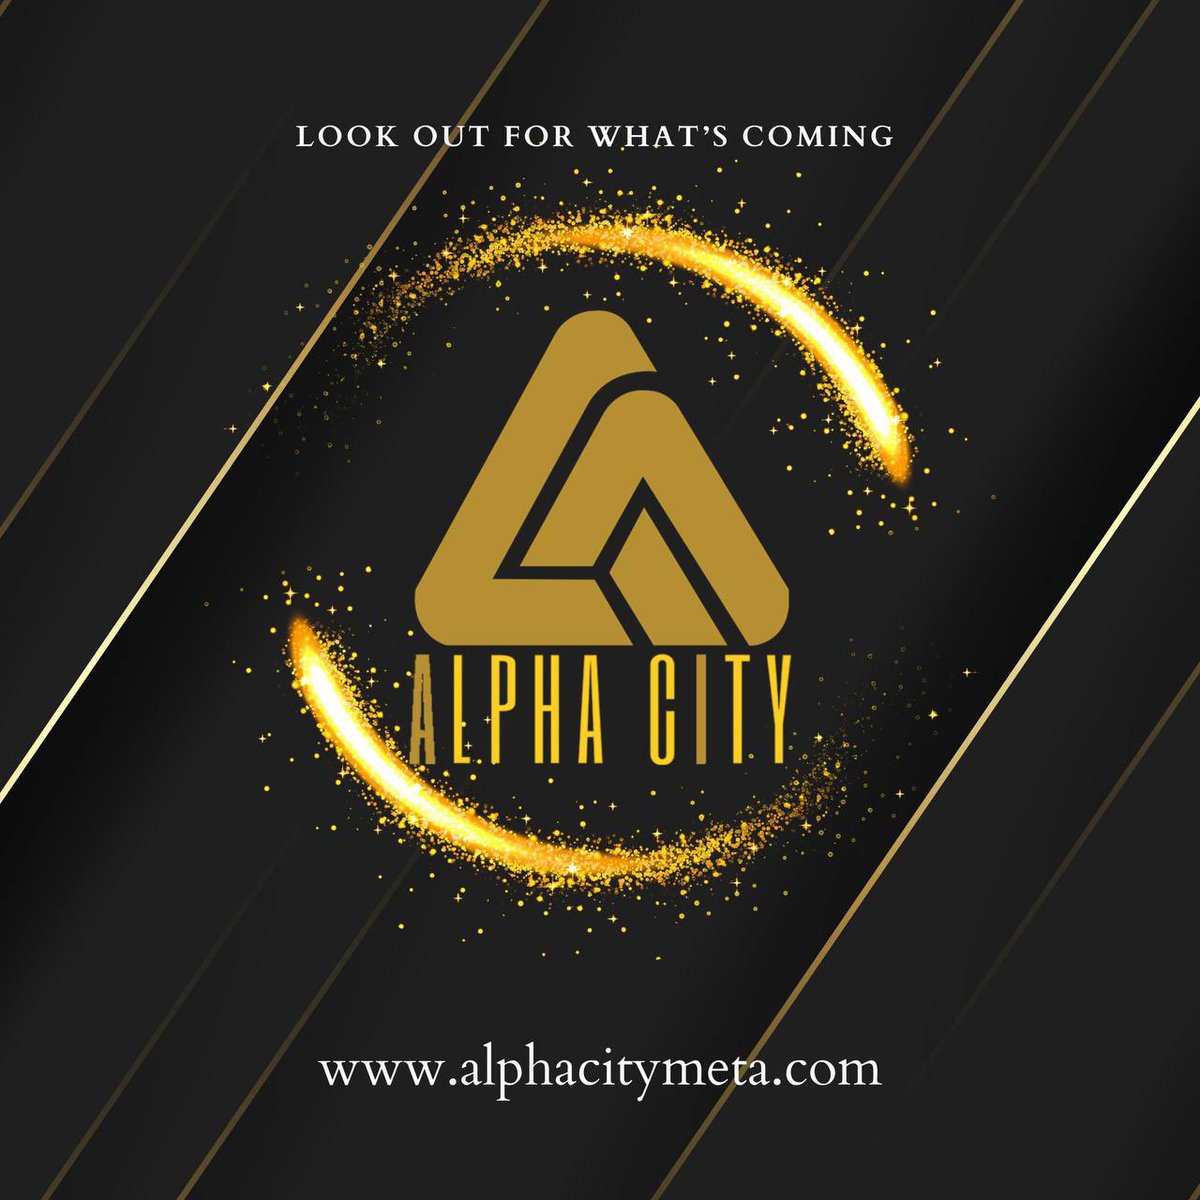 Get ready to explore a groundbreaking metaverse! Alpha City's hyper-realistic virtual world offers diverse attractions, user-driven events, and the freedom to create your own living and business environments. Experience it now!
$ALPHA #AlphaCityAI